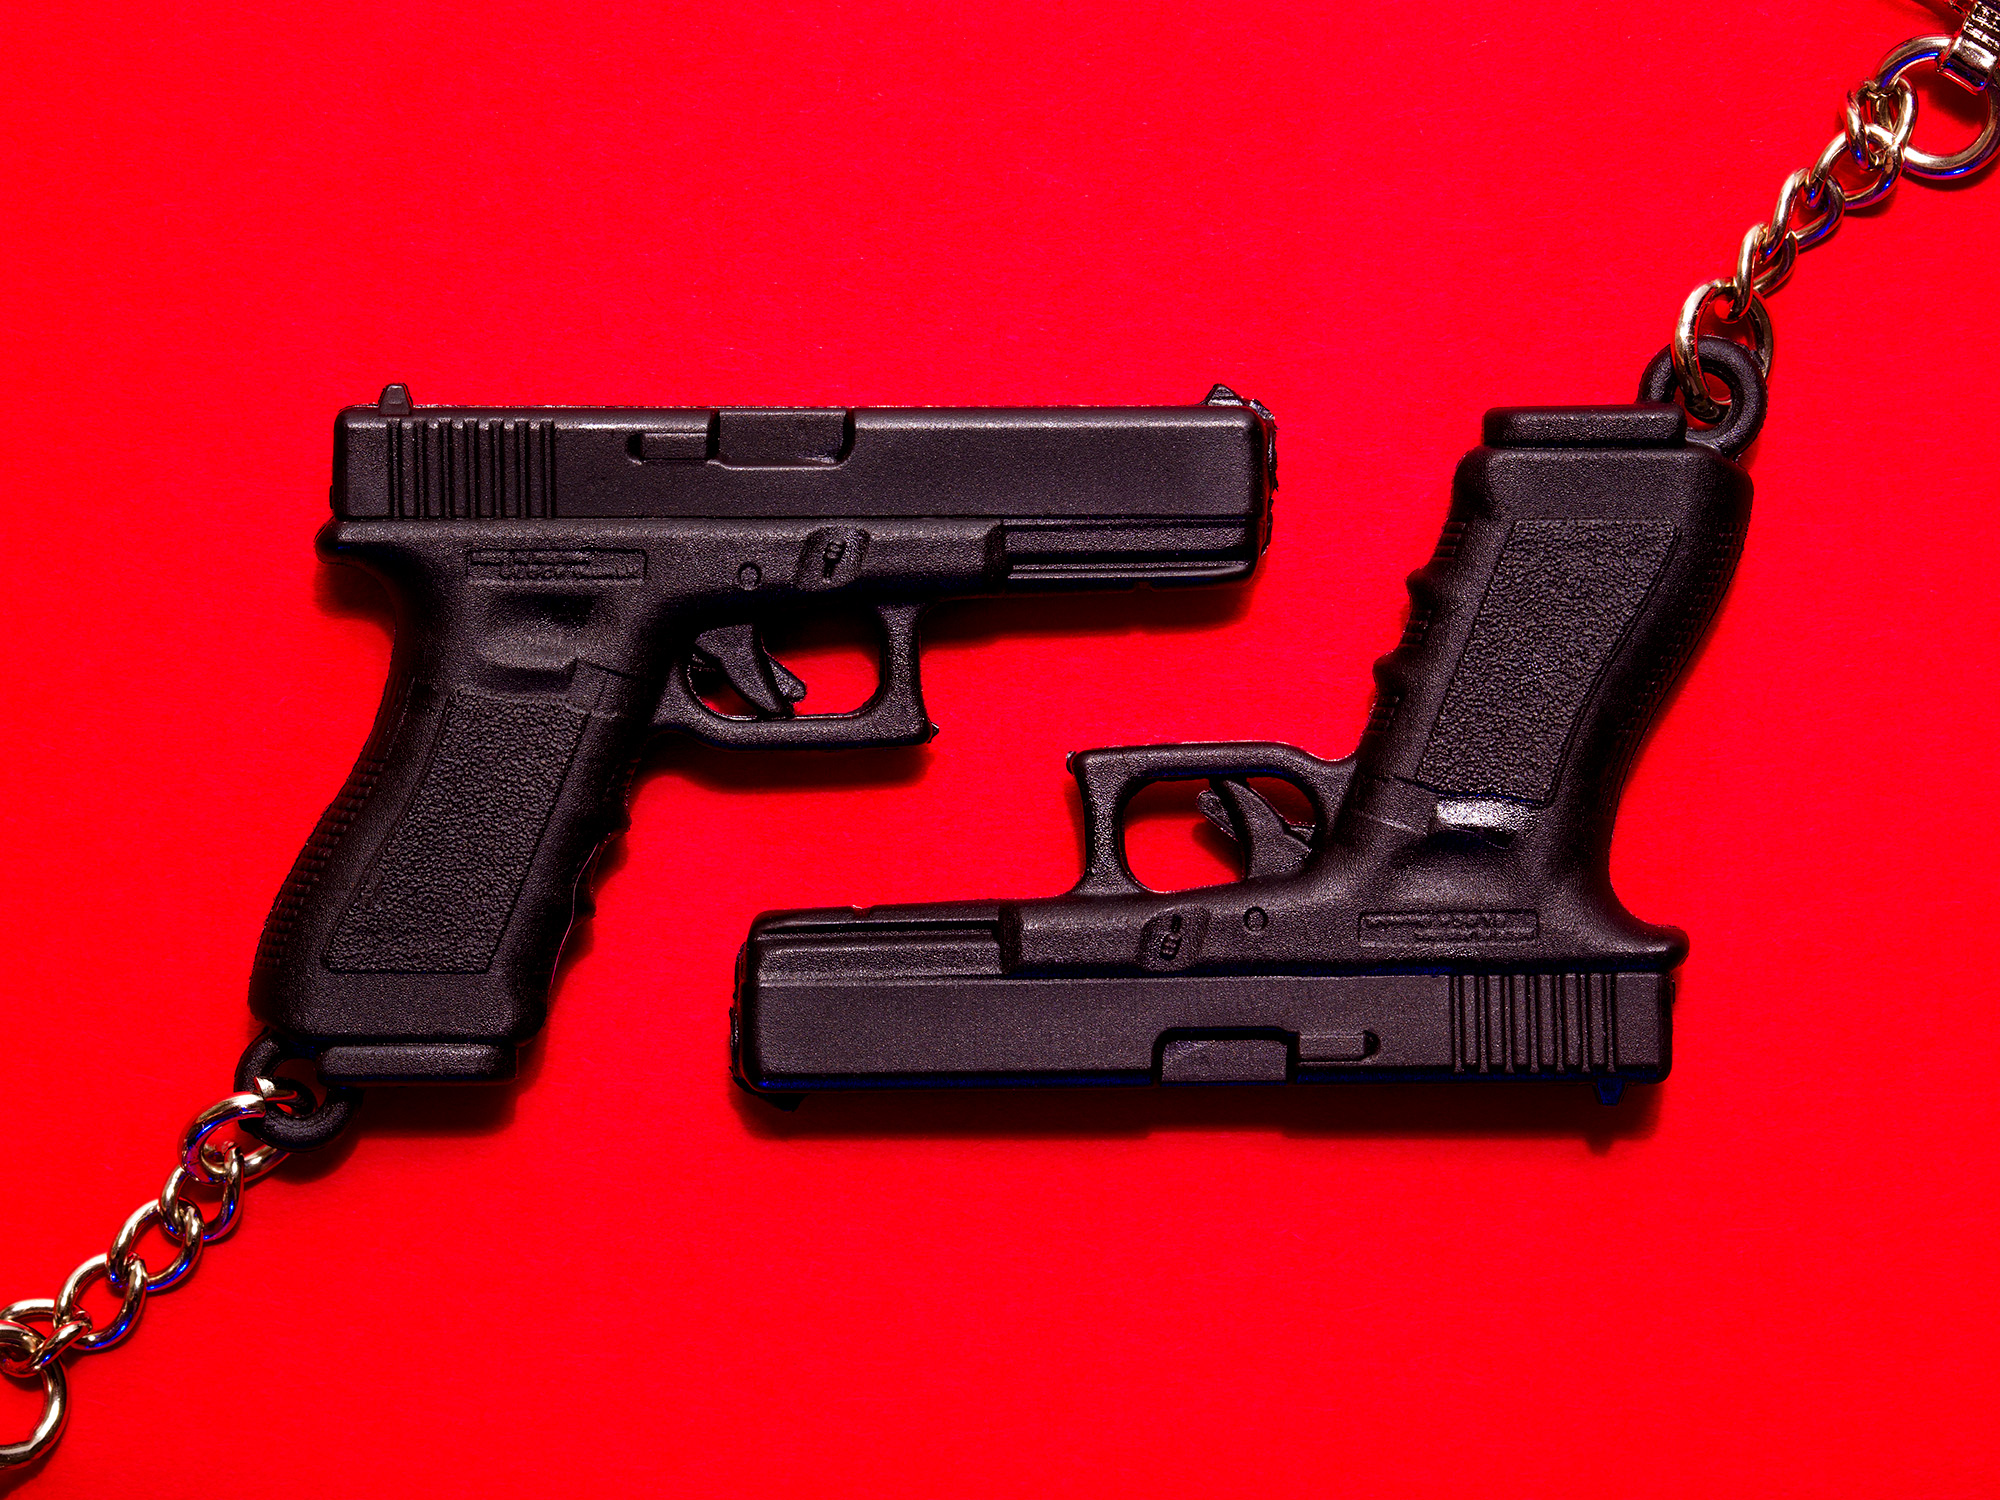 A pair of promotional keychains from the Glock company, photographed in studio by Todd Spoth.